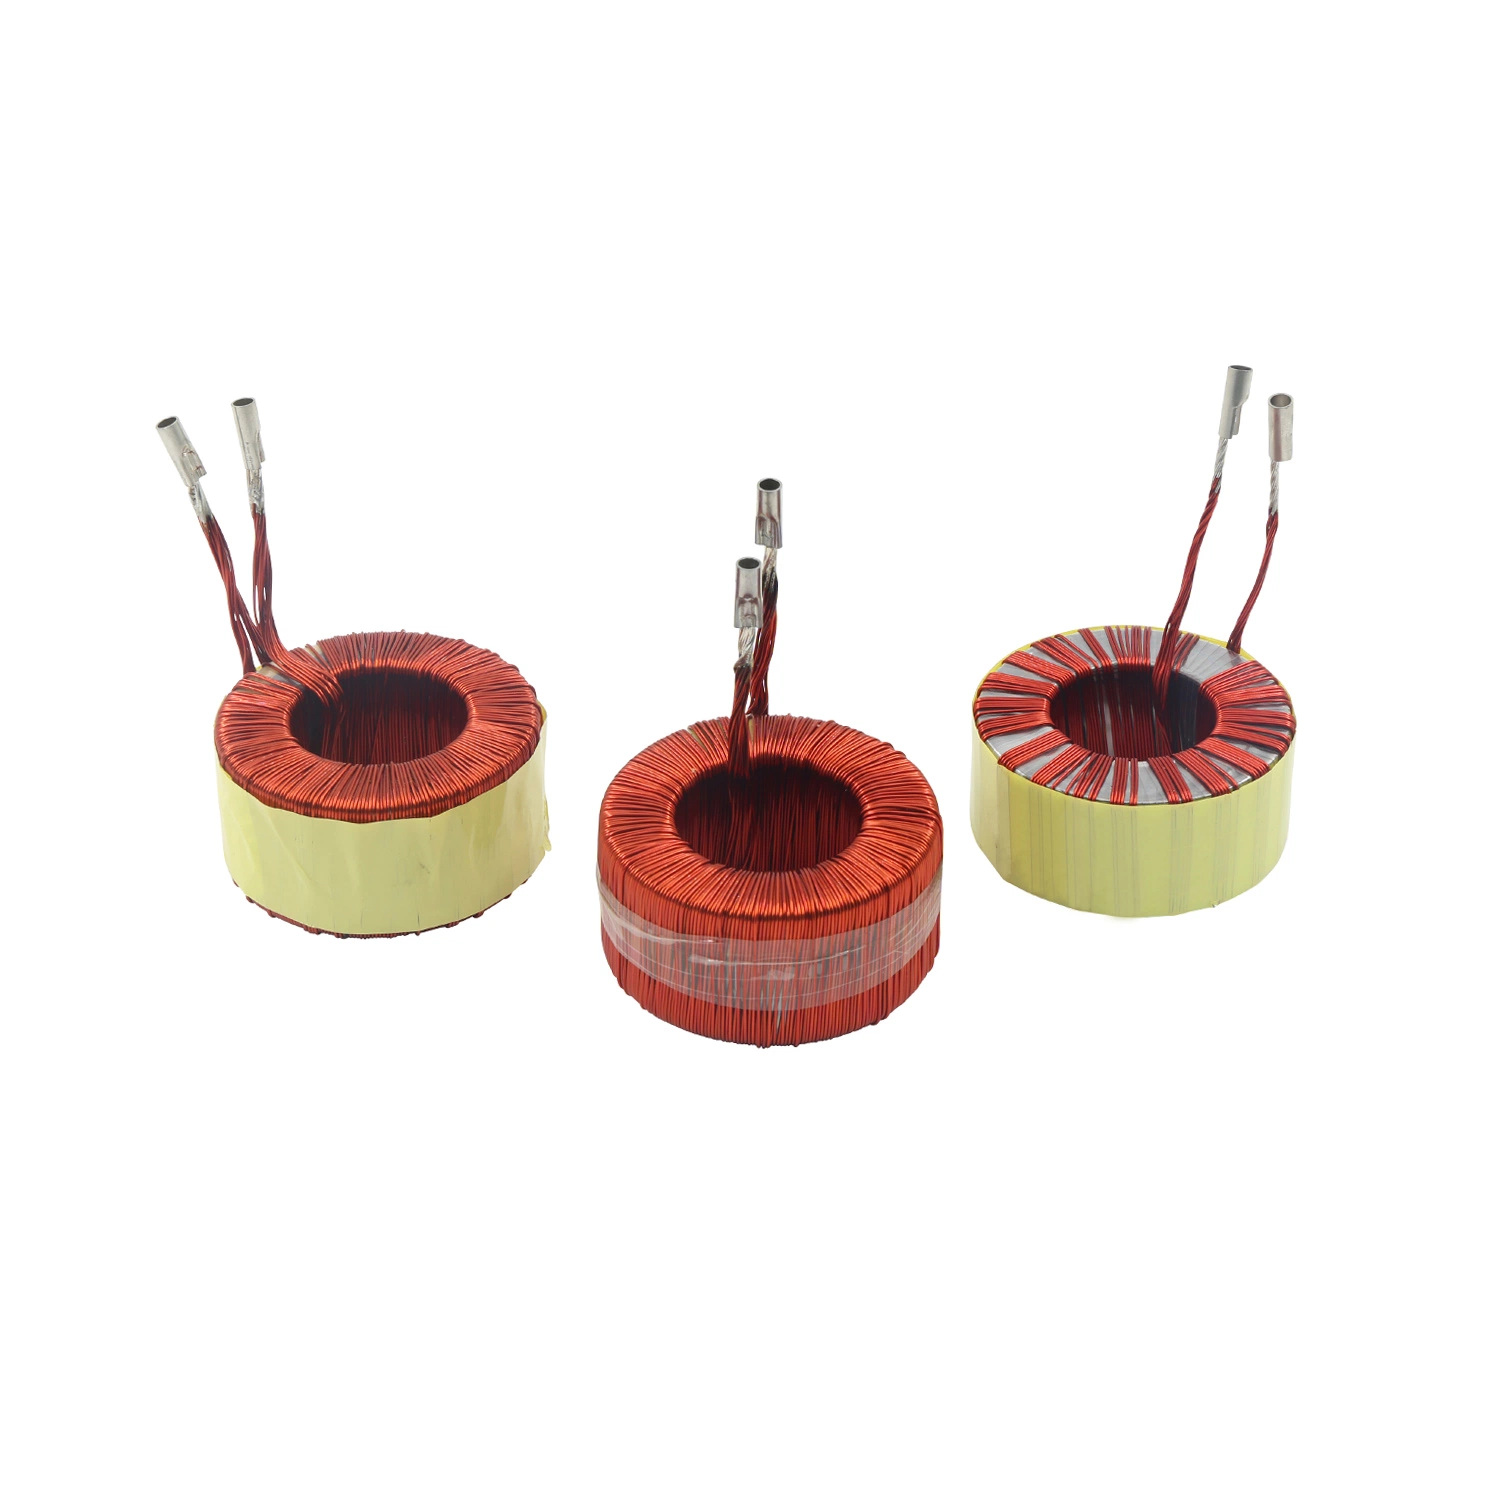 Toriodal Core with Secondary Winding for Measuring Current Transformer